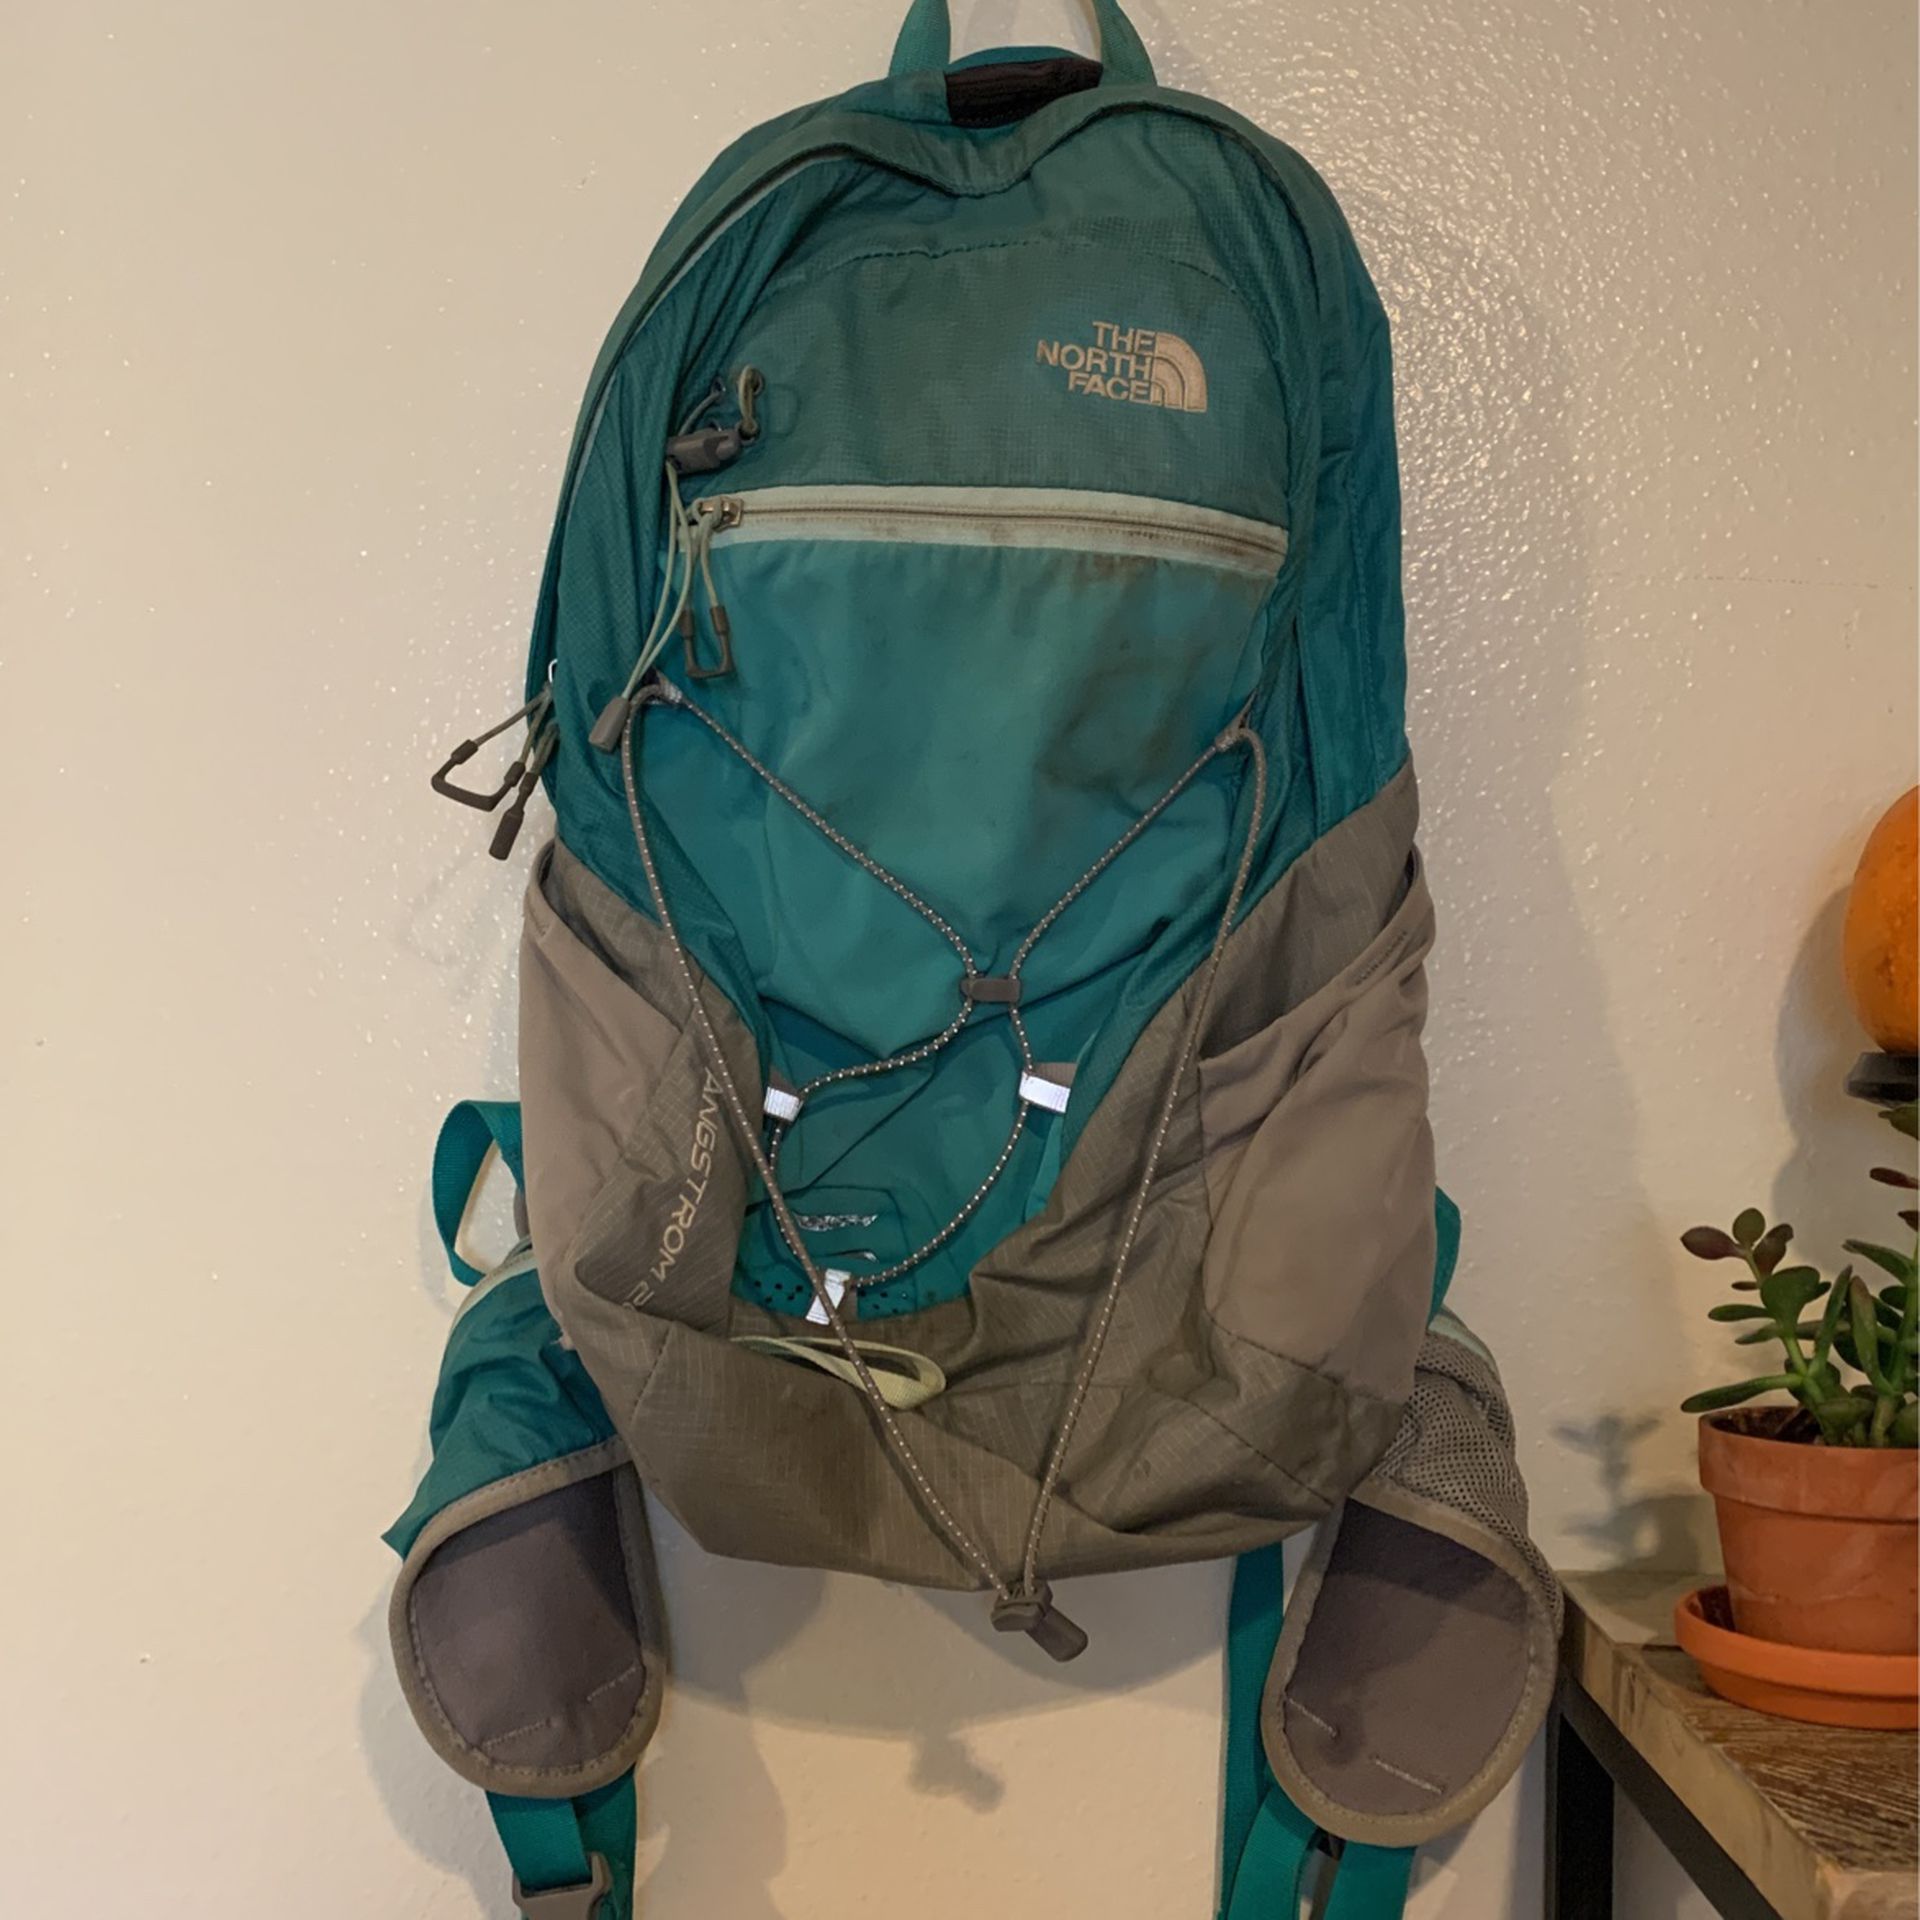 Northface Angstrom 20 Backpack